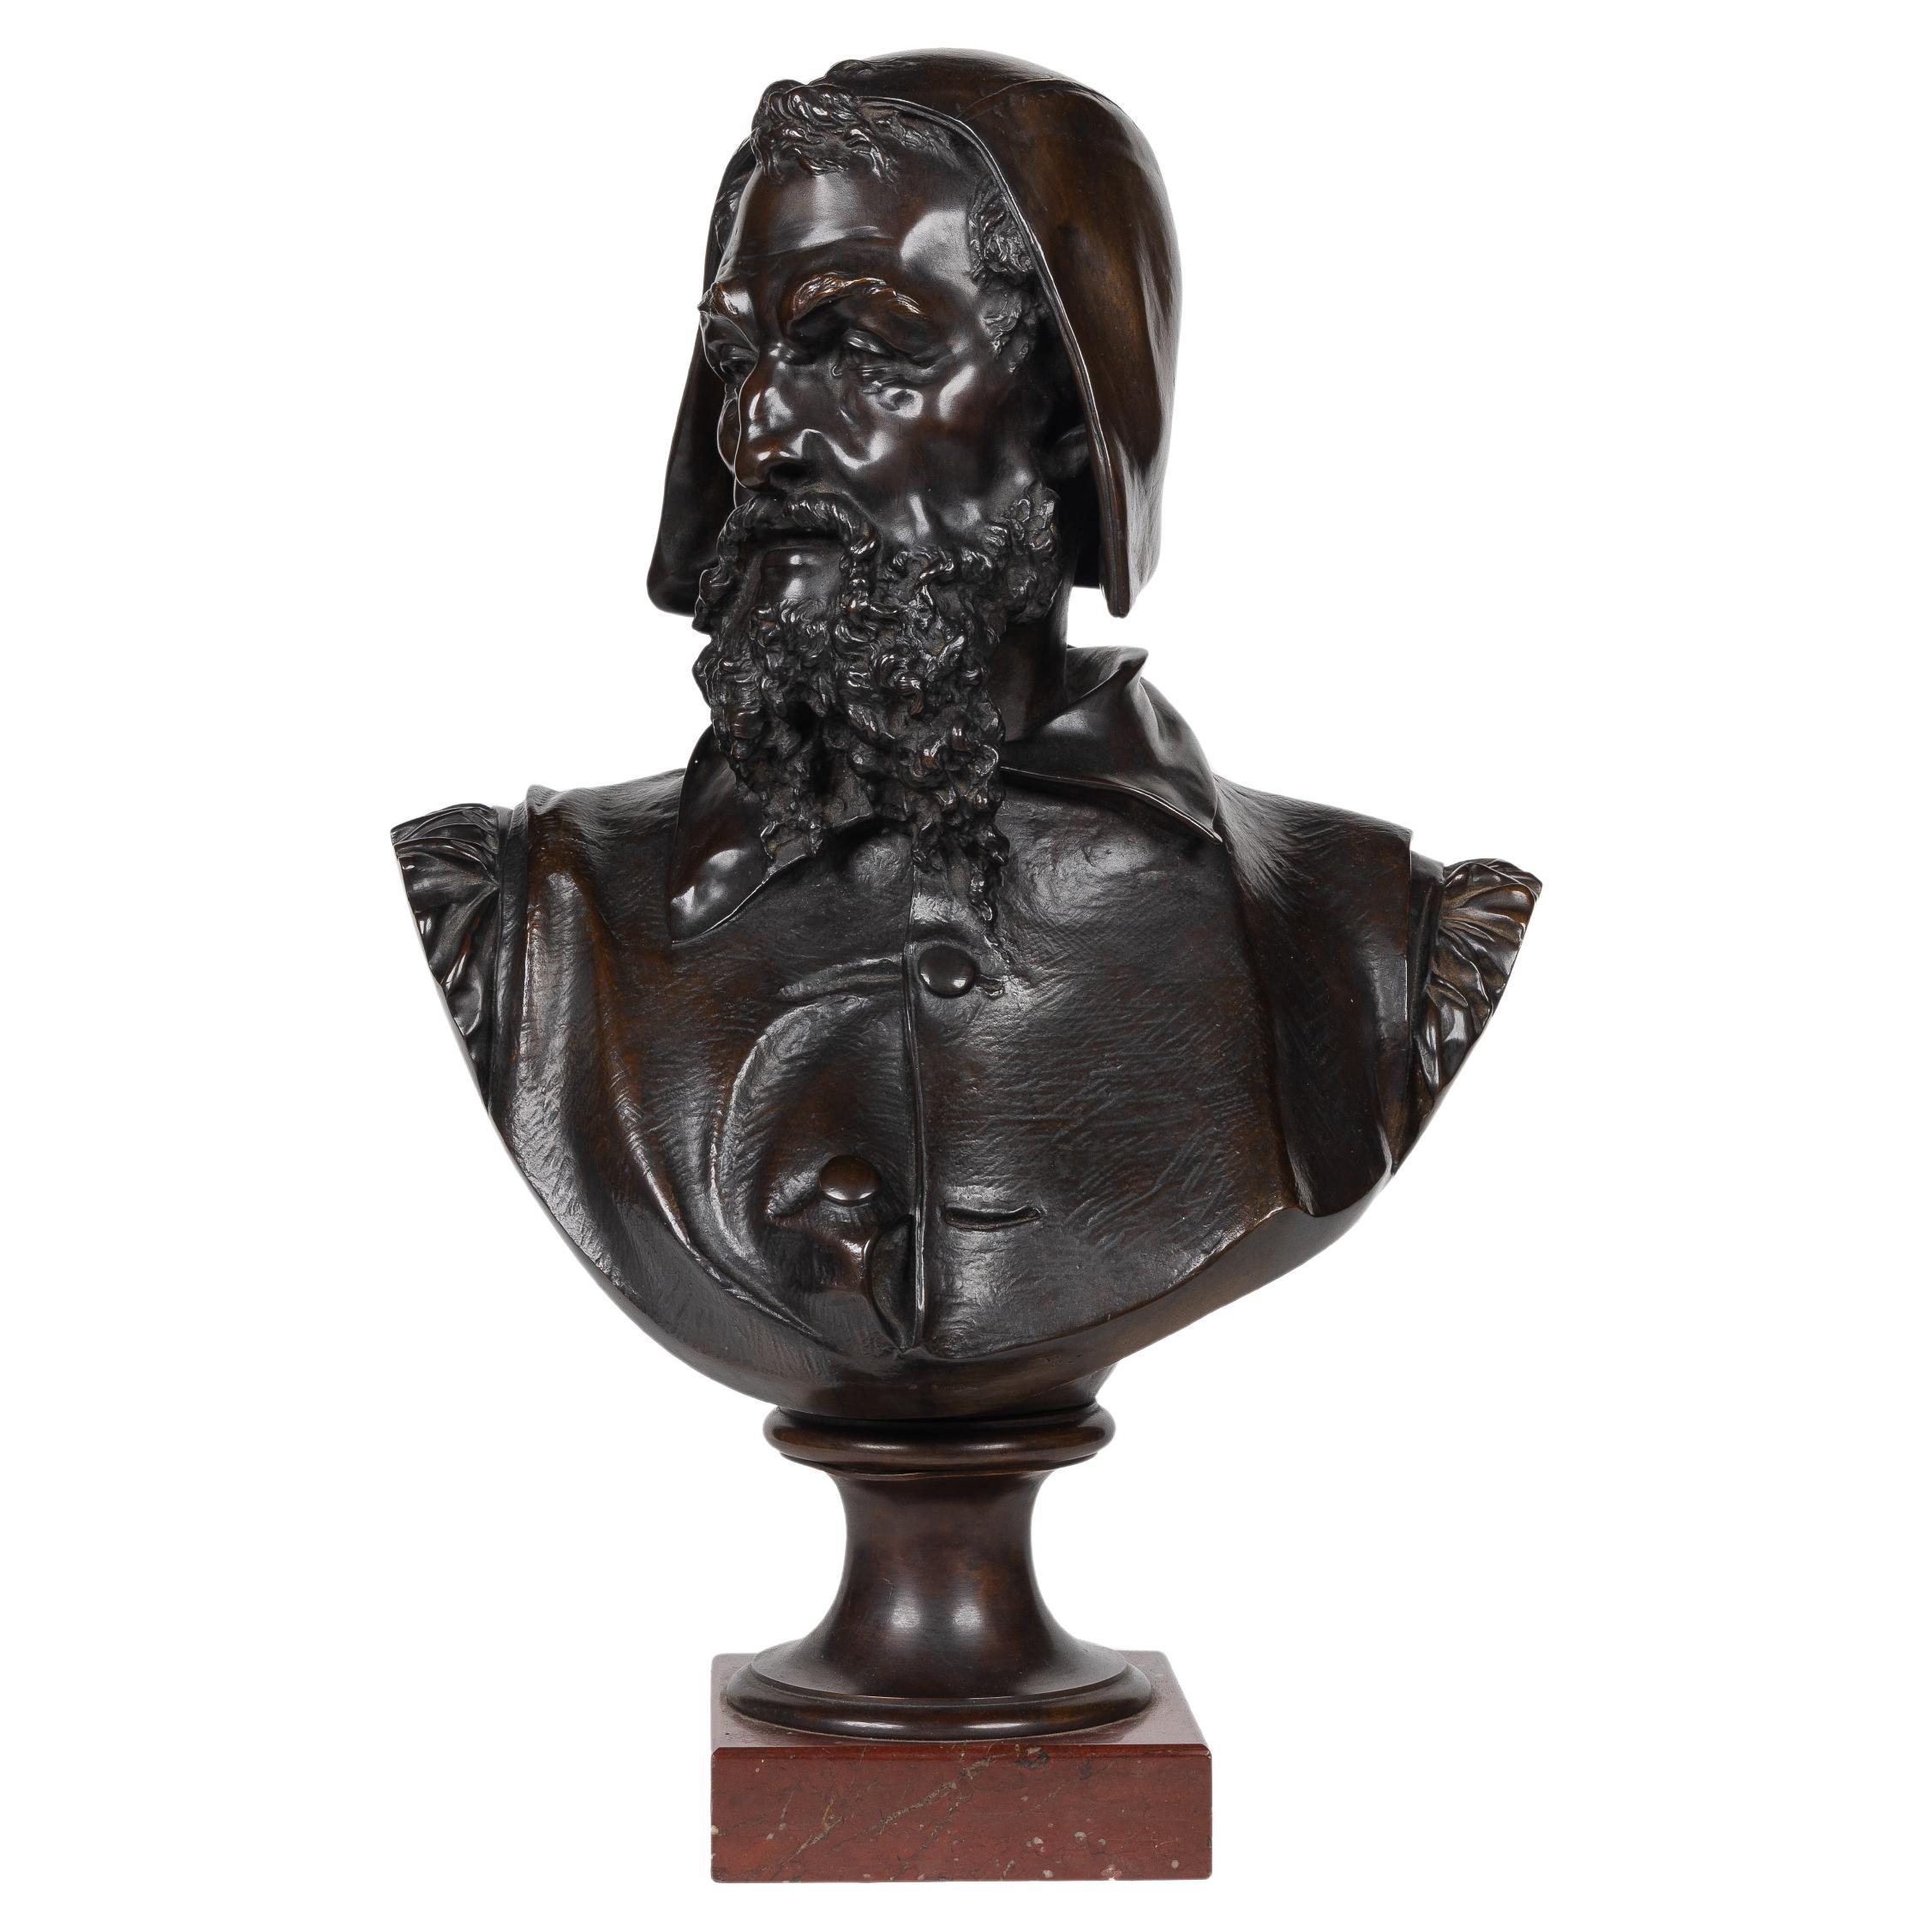 Albert-Ernest Carrier-Belleuse, A Rare and Important Bronze Bust of Michelangelo For Sale